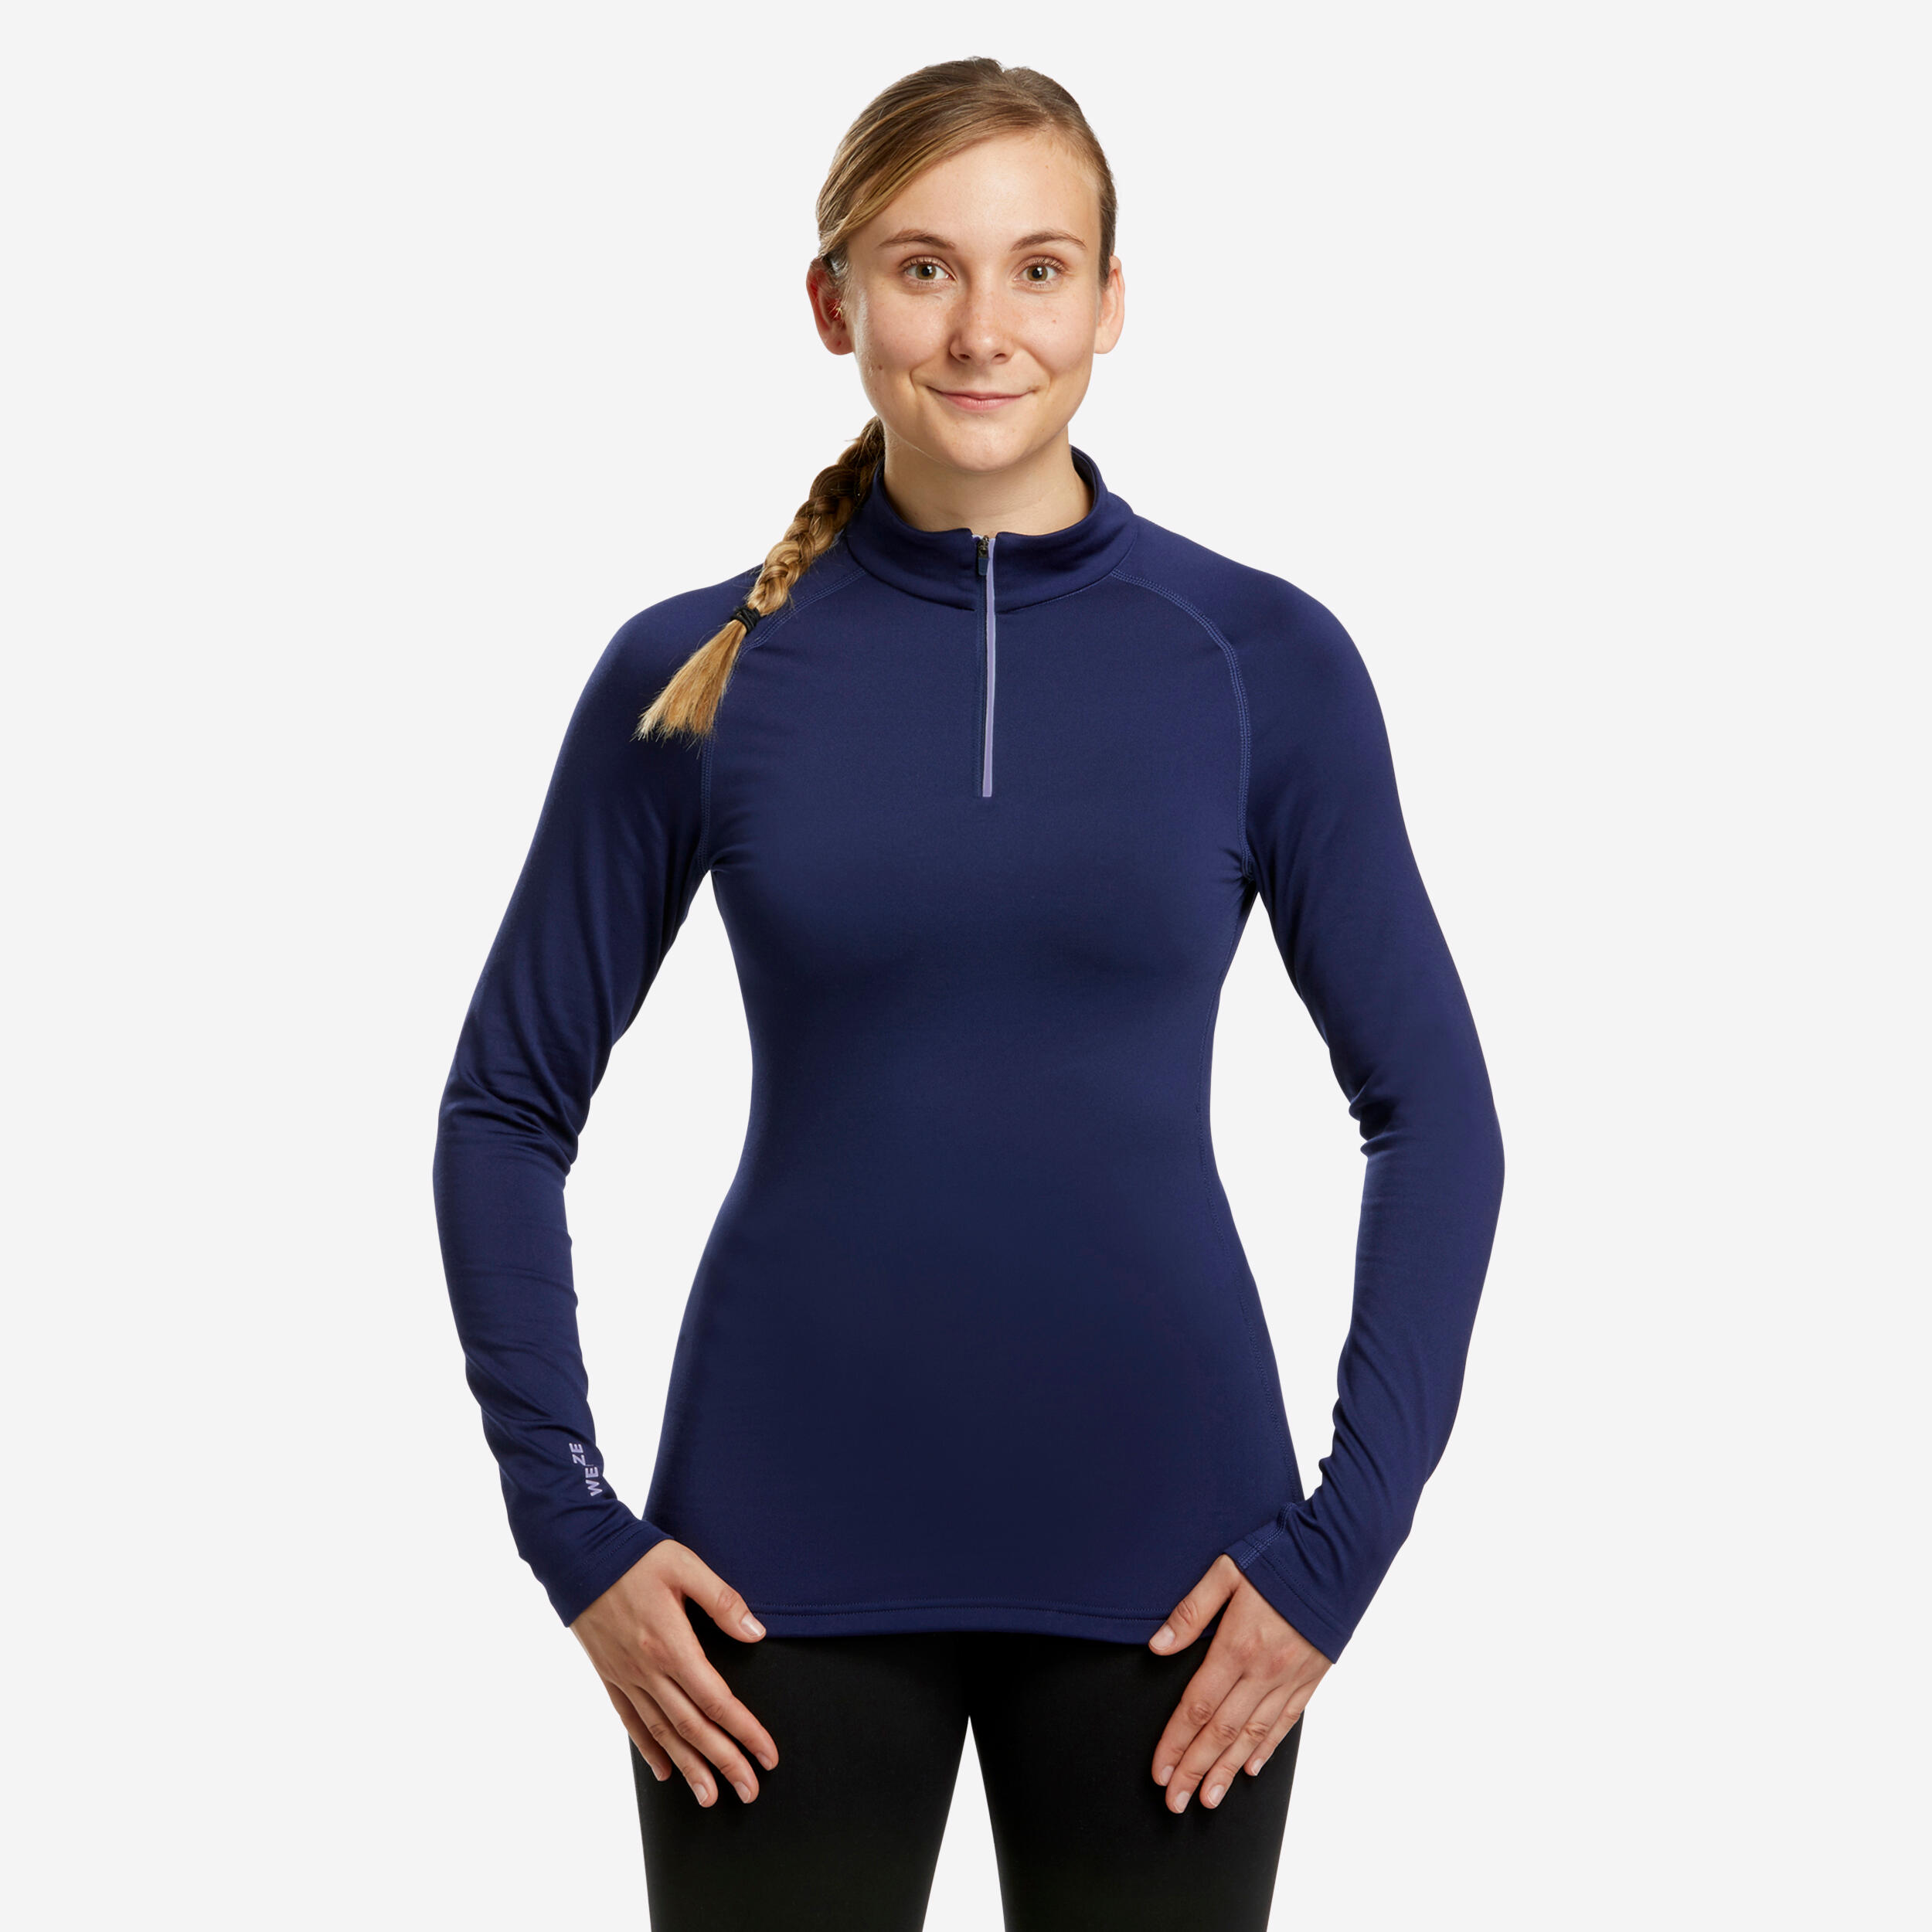 Image of Women's Base Layer Top with Half-Zip - 500 Blue